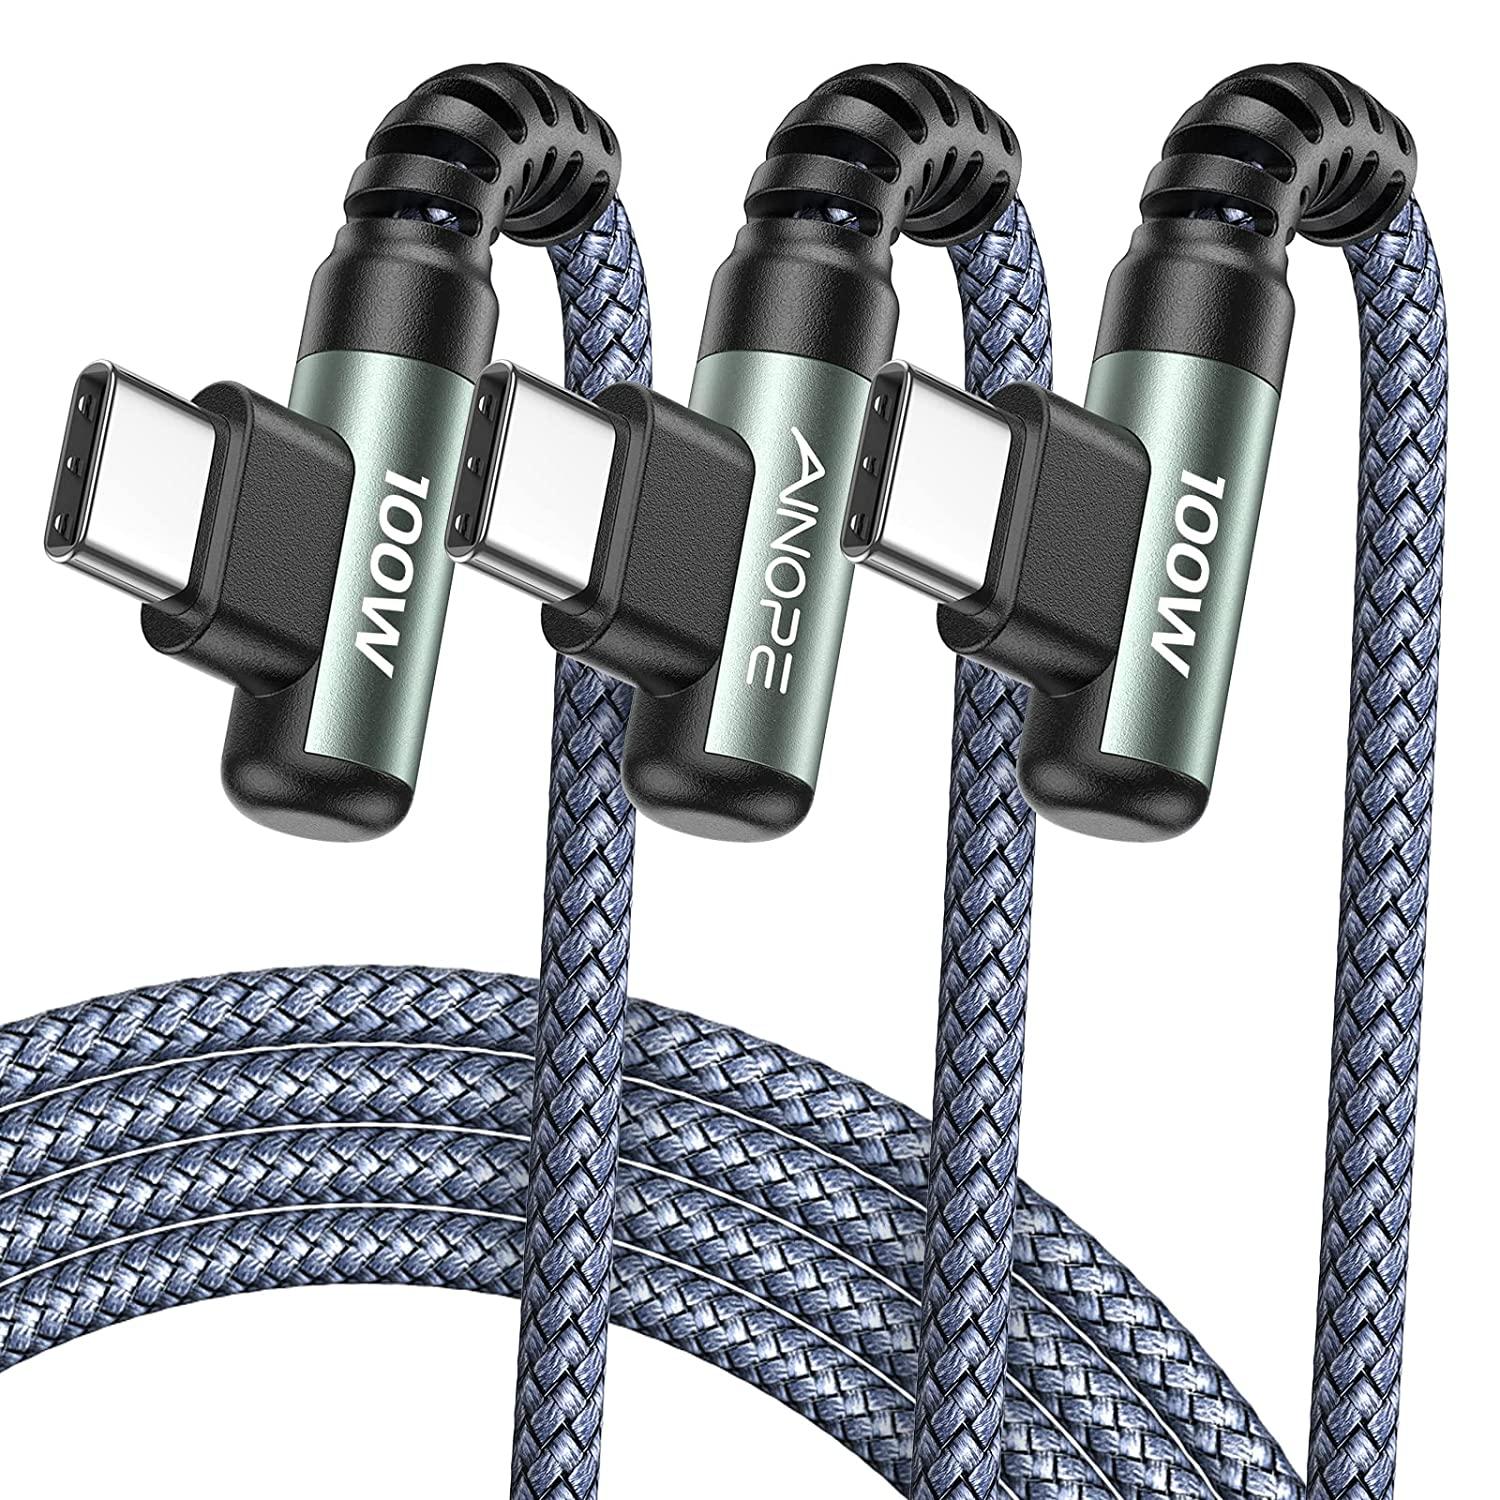 USB-C to USB-C 100W Braided Cables 3 Pack for $12.05